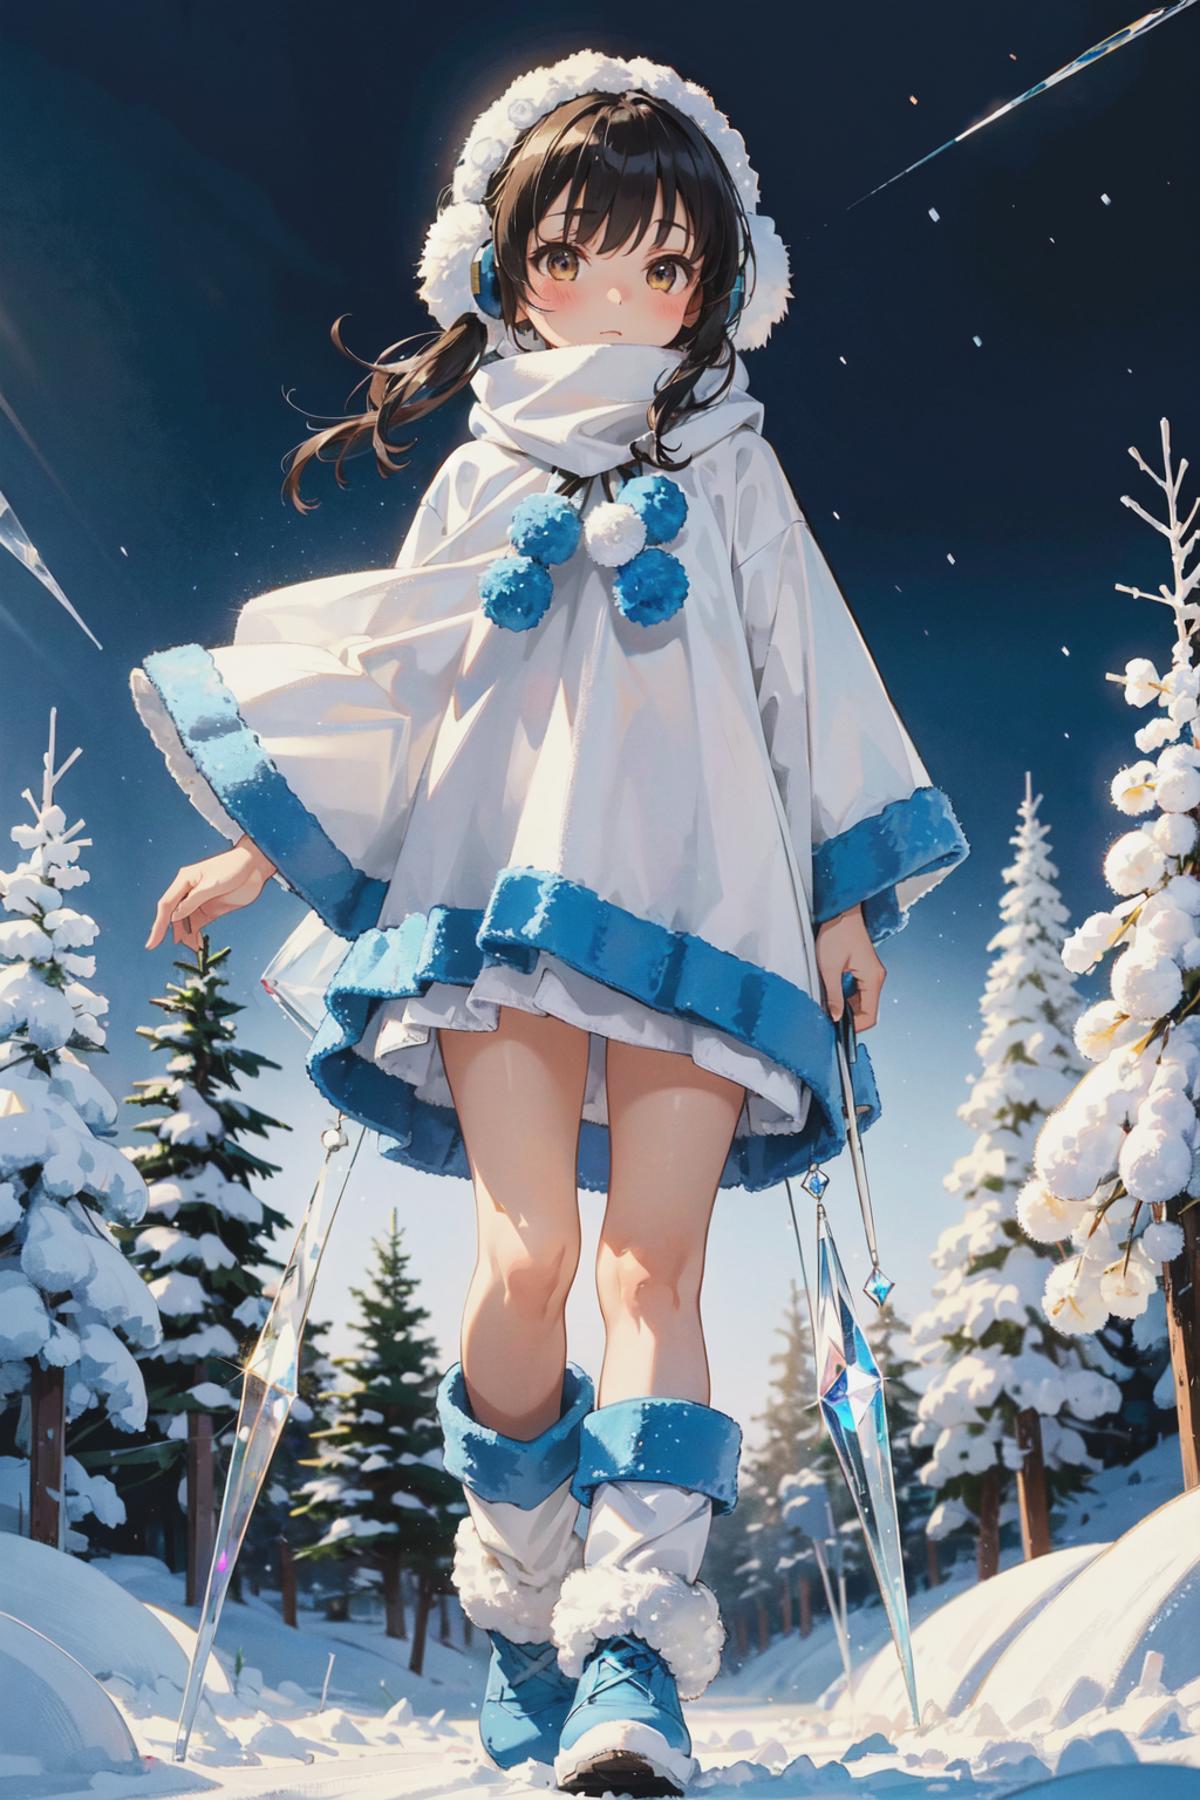 An anime-style woman in a white dress with blue accents and a scarf, standing in a snowy wooded area.